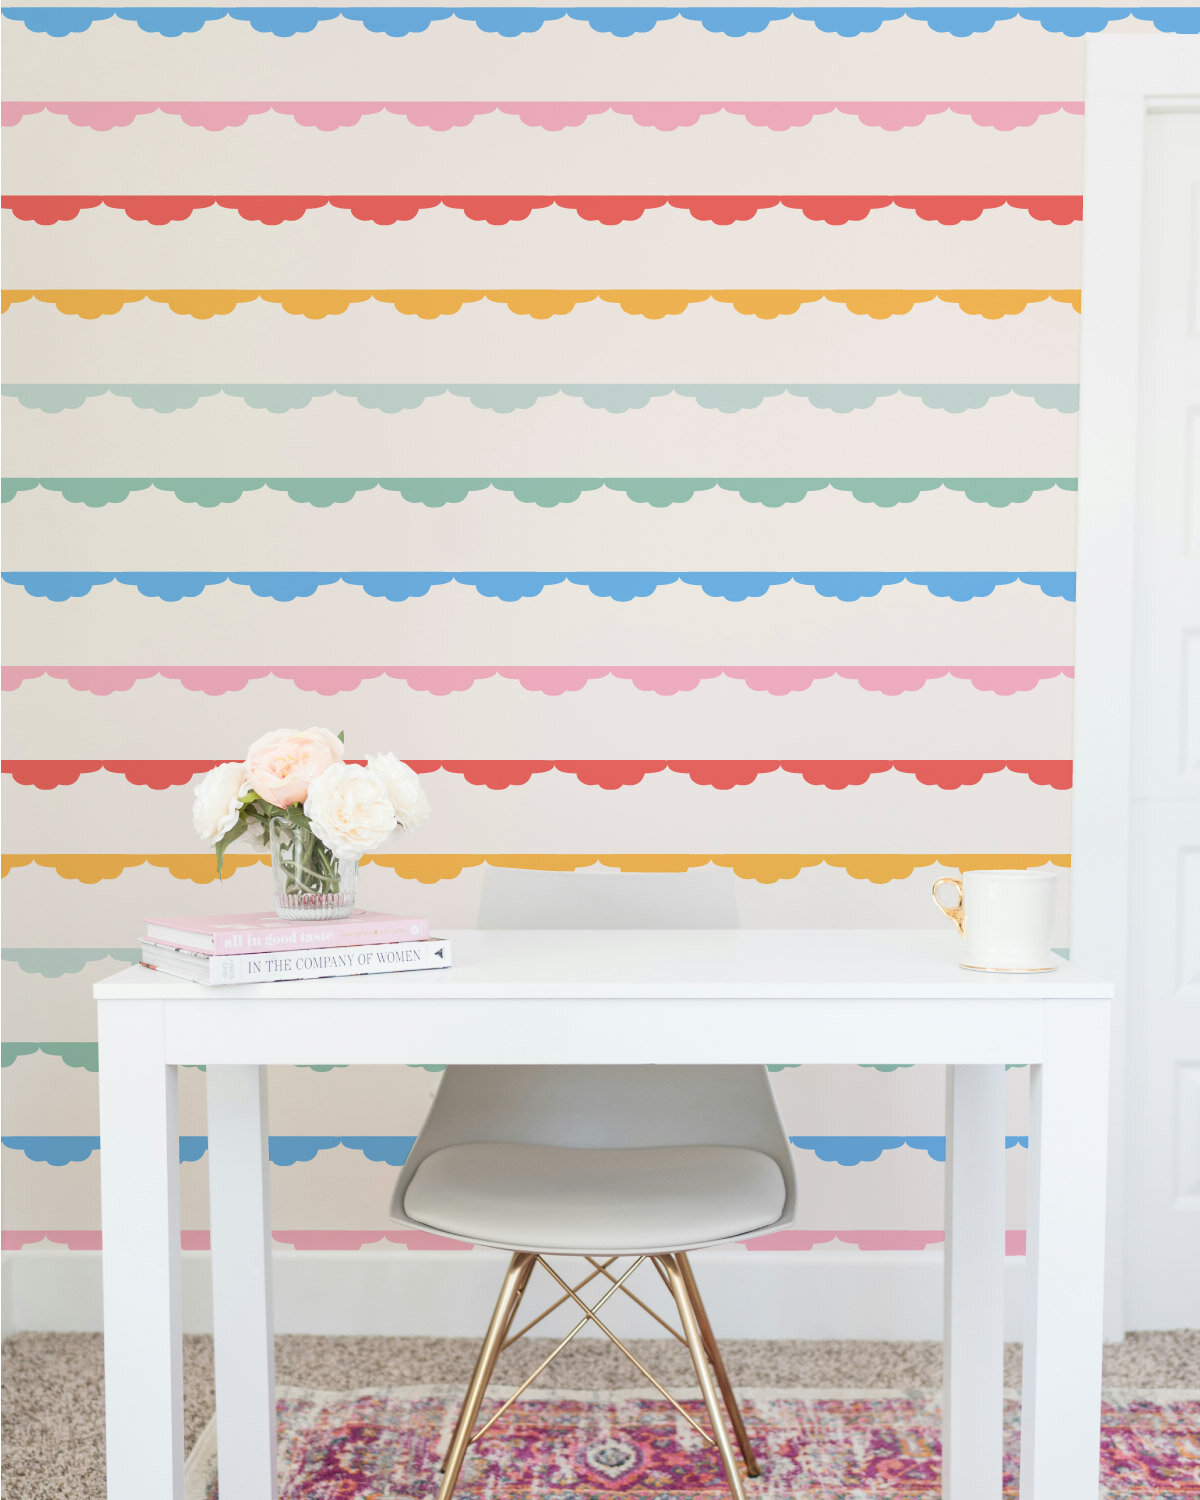 Thrilled to see that my Rainbow Ruffle Stripe design was picked by @thehomeedit for their curated collection with @spoonflower 🌈  Such a dopamine booster, this one. Bring on the rainbow rooms! (Don't mind me while I imagine the joyful home office of